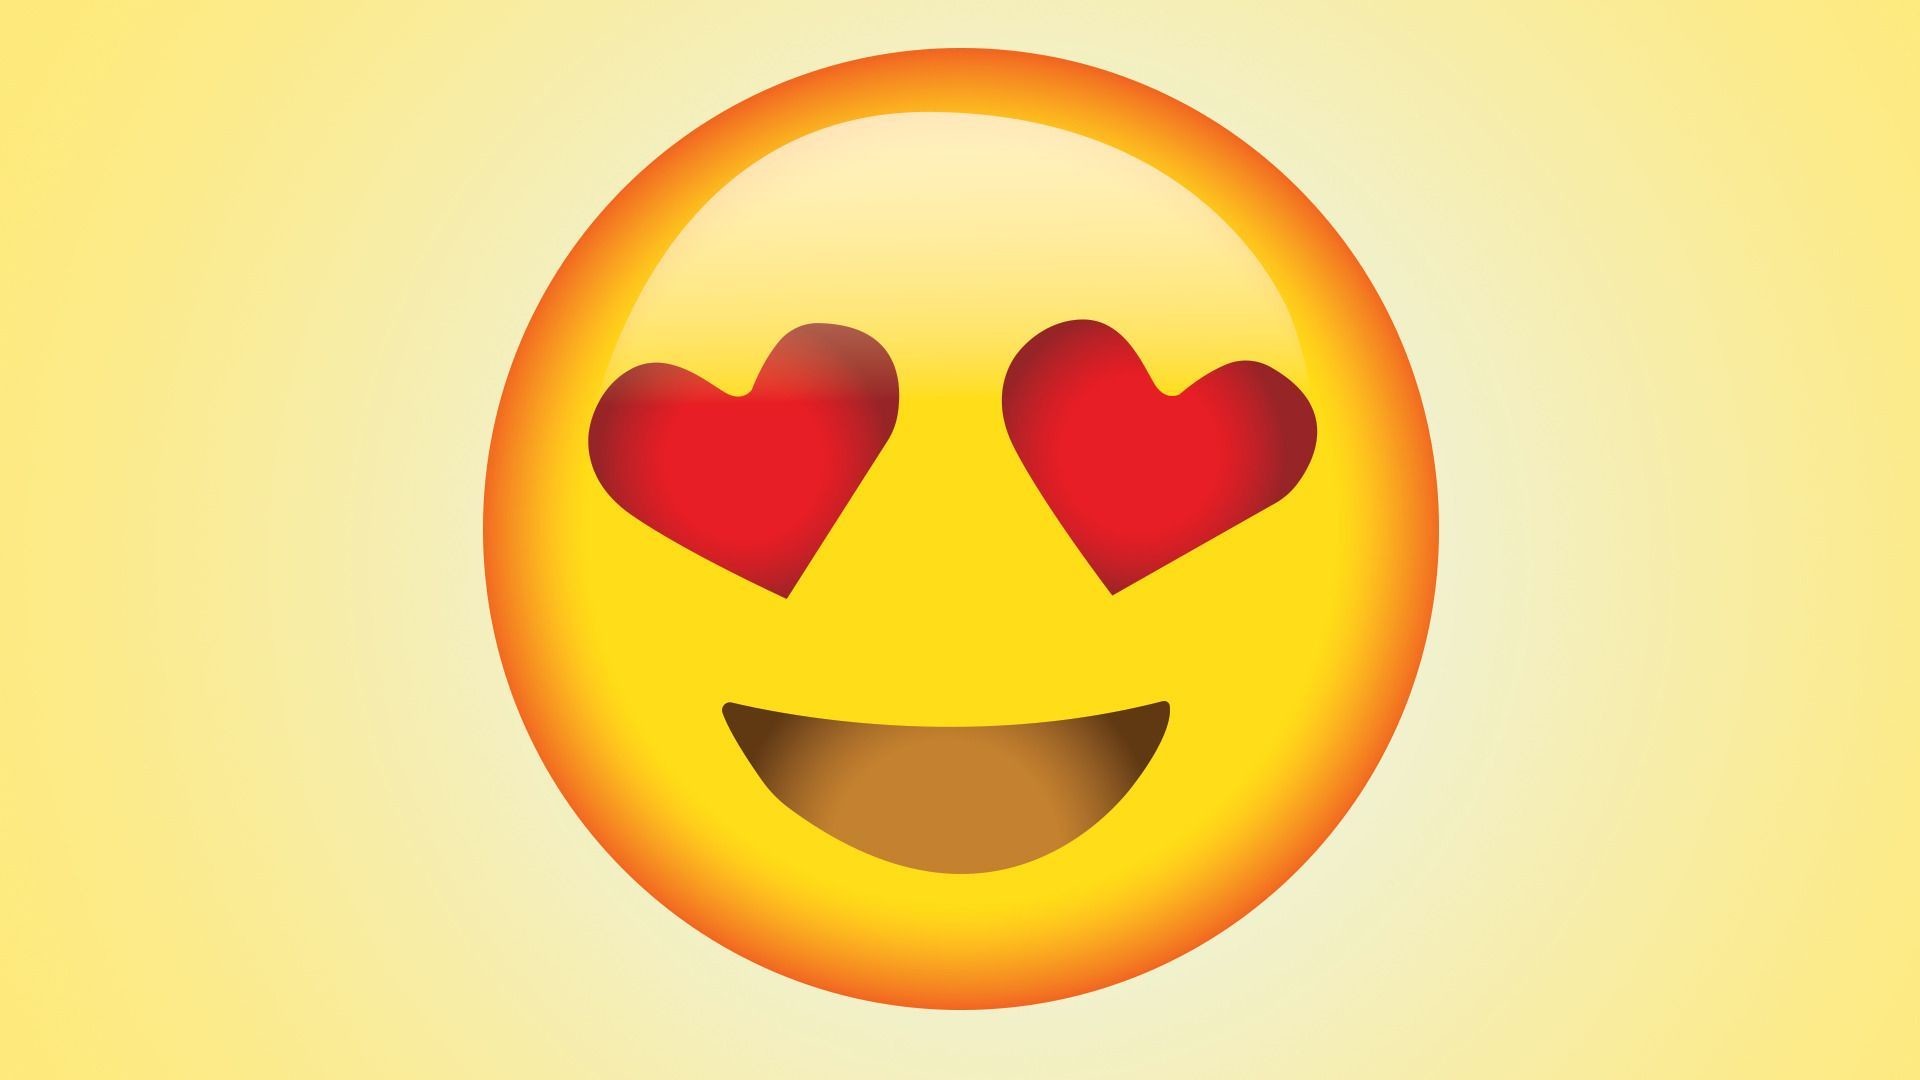 Free Emoji Apps Beyond What S Pre Loaded In Your Phone - Likes Emoji - HD Wallpaper 